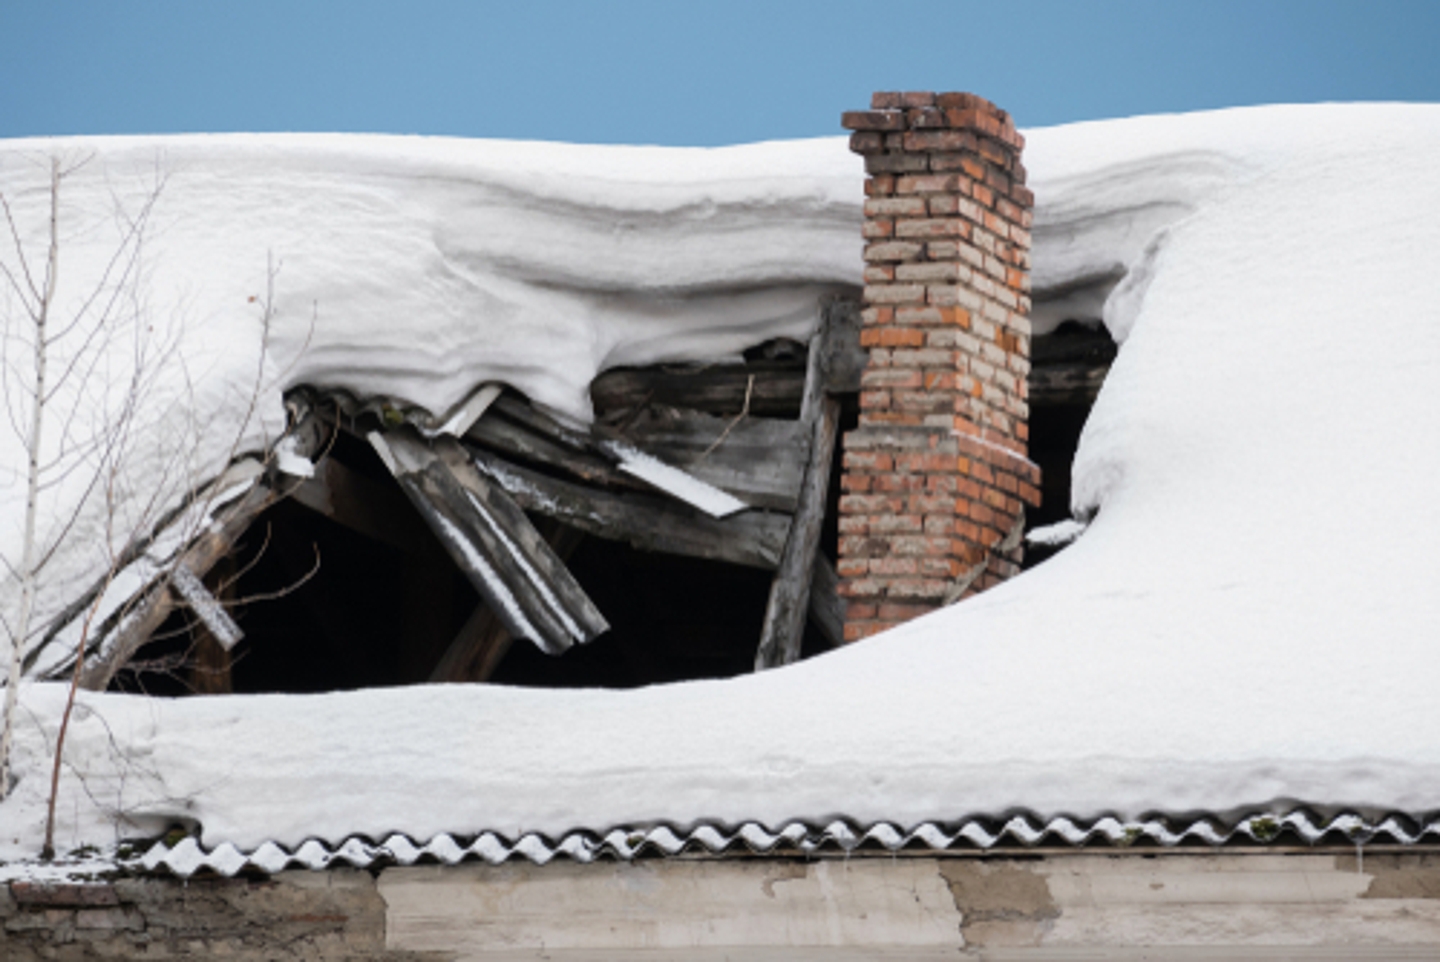 Snow can cause damage to your roof and even cause a roof collapse. SERVPRO repairs roof damage of all types.